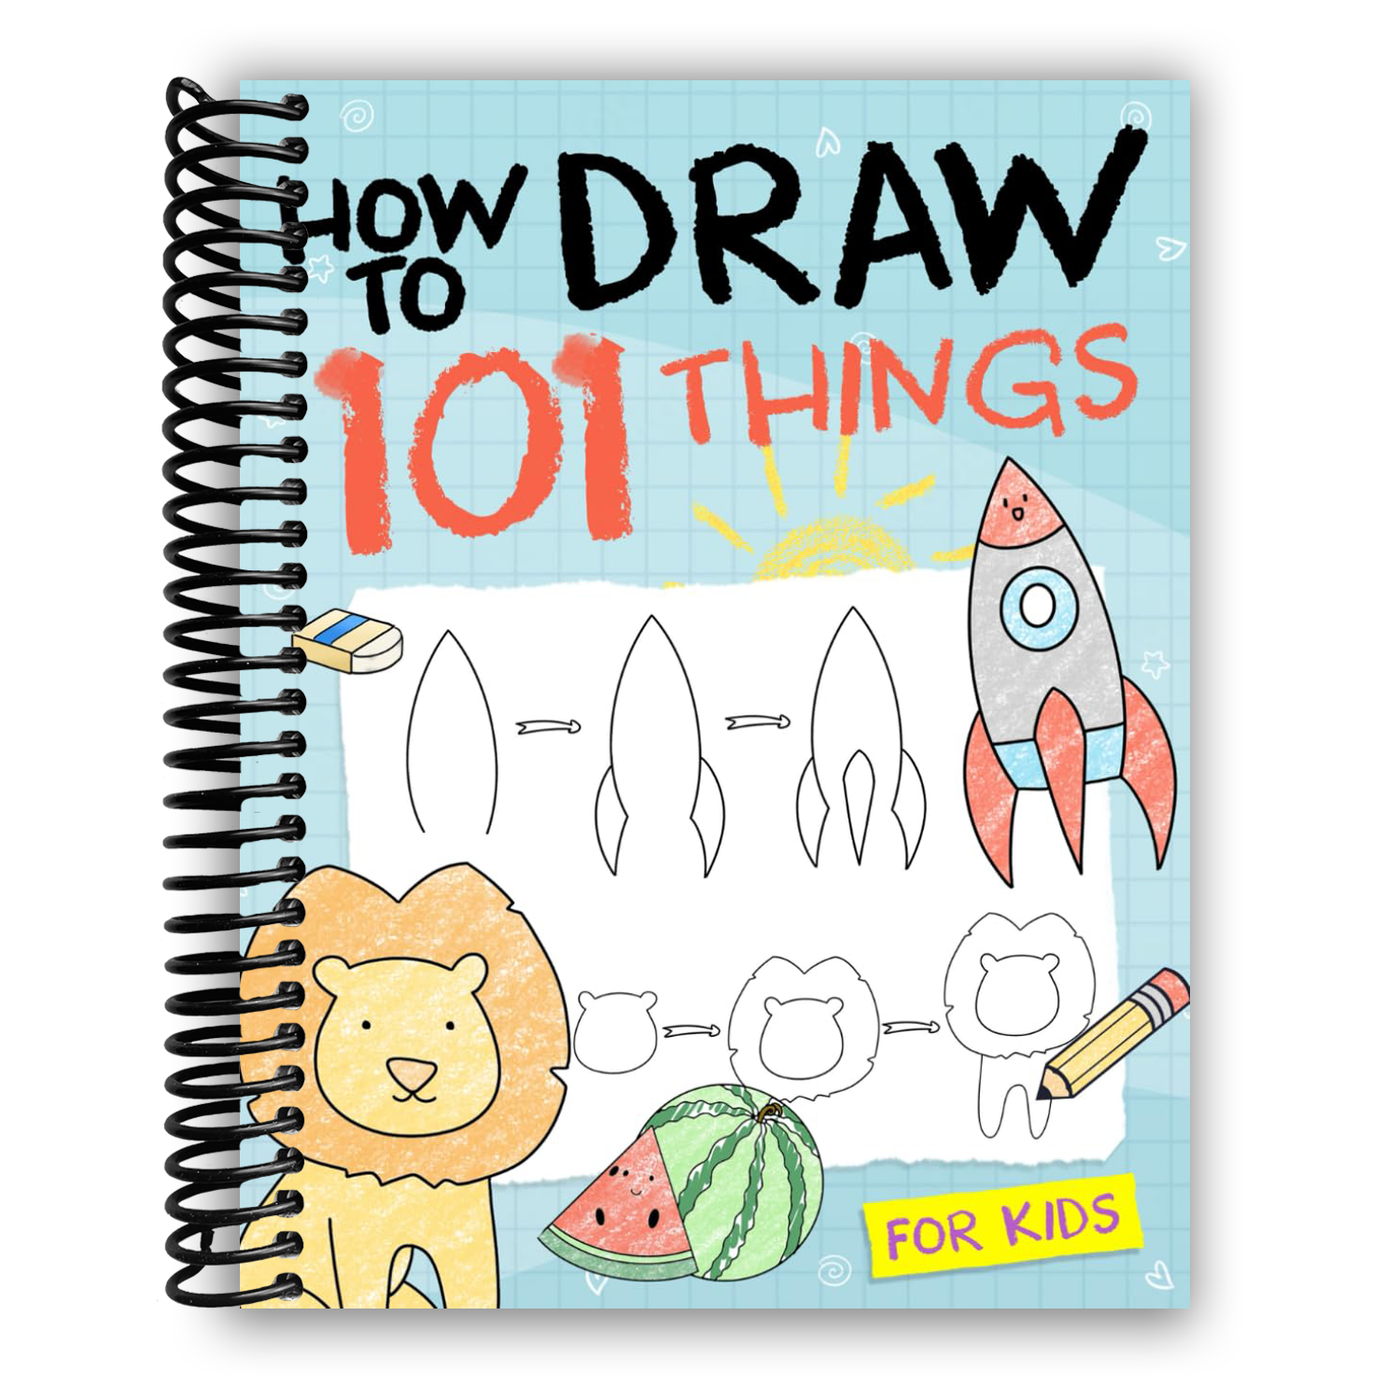 How To Draw 101 Things For Kids (Spiral Bound)